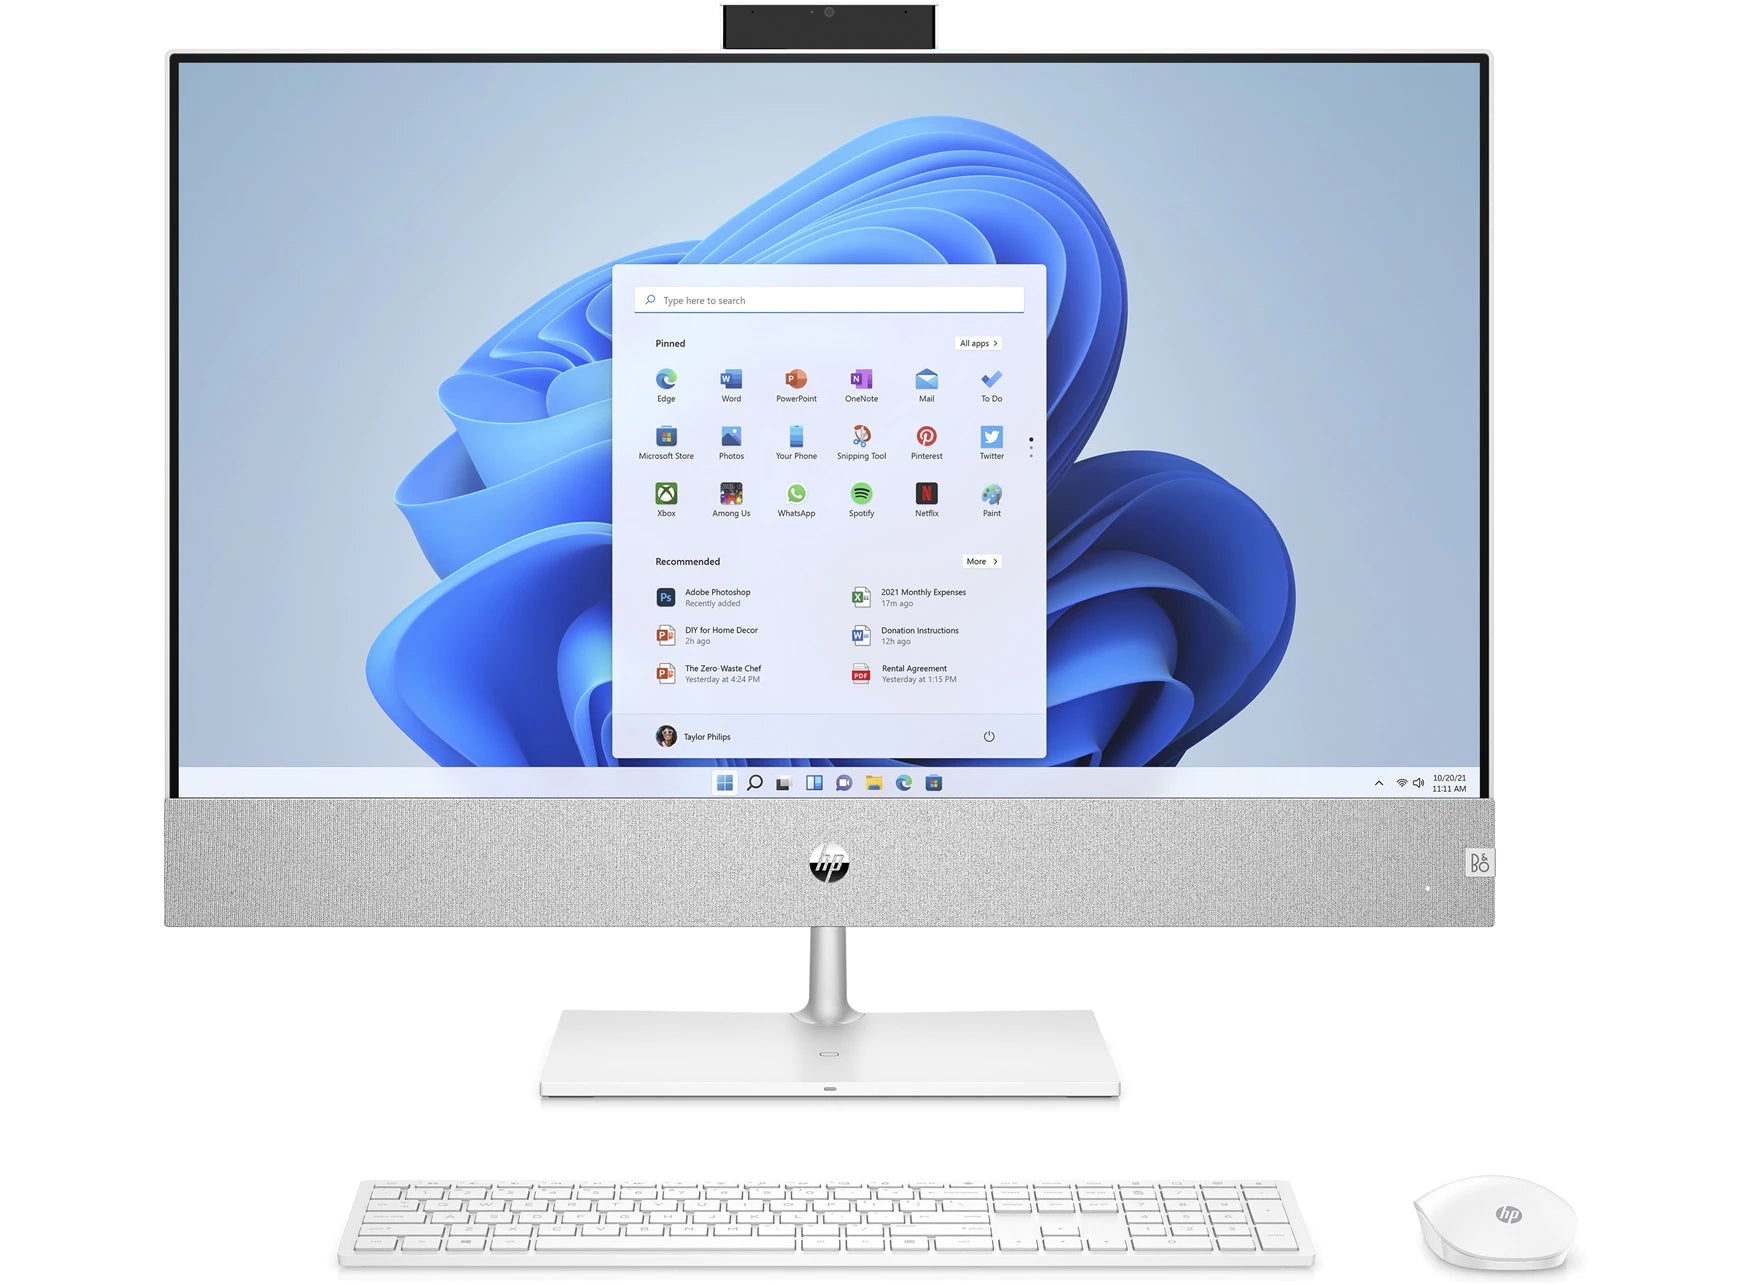 HP Pavilion 27-ca1009 All-in-One PC